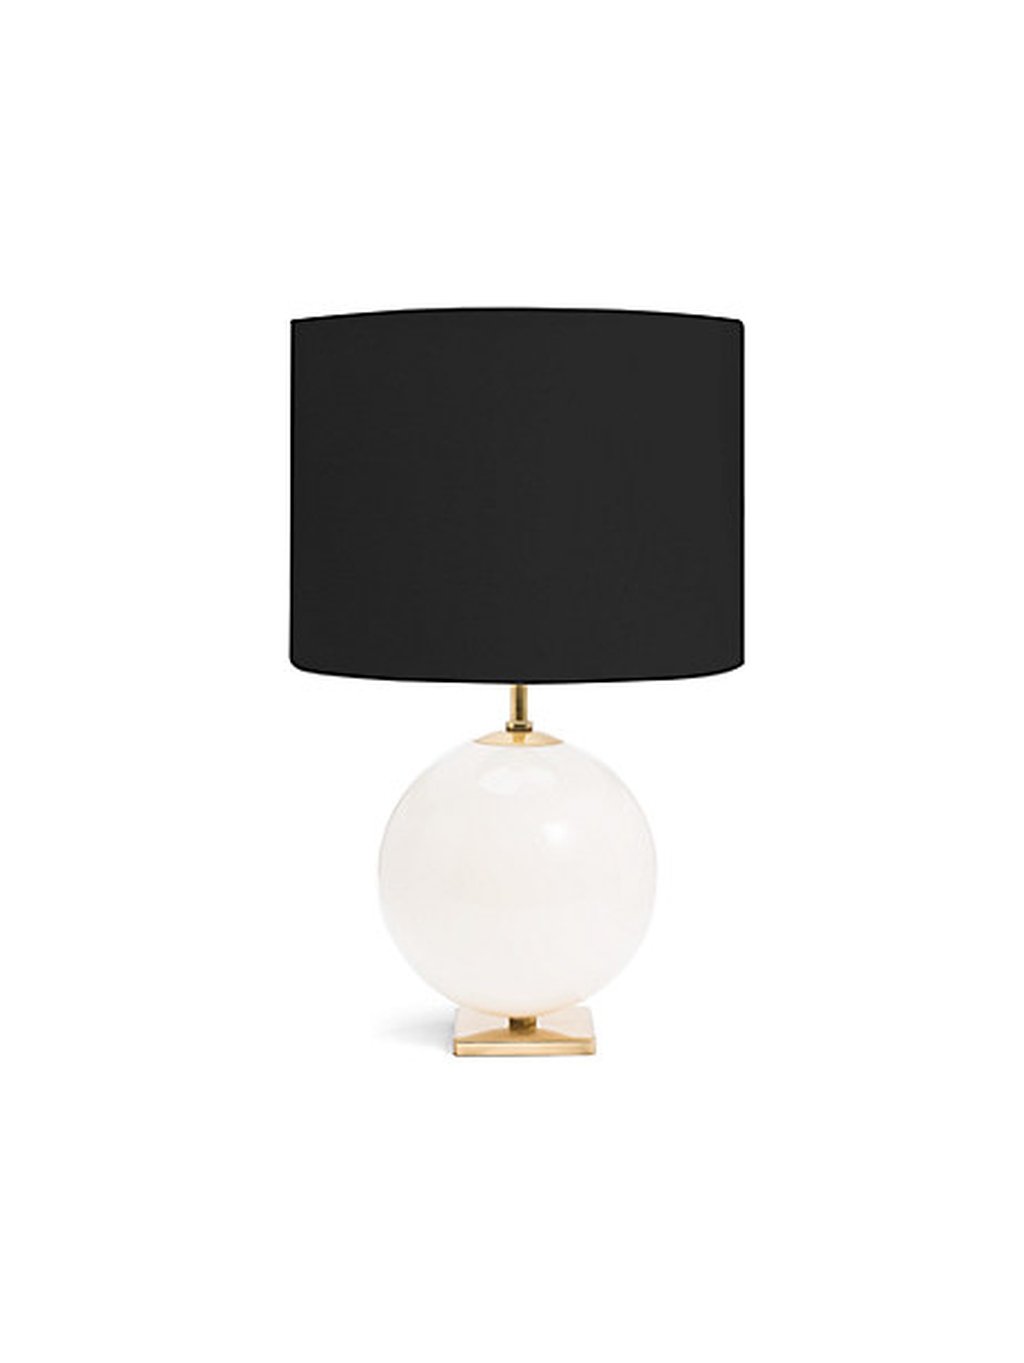 Awesome Table Lamp Ideas To Brighten Up Your Work Space 40